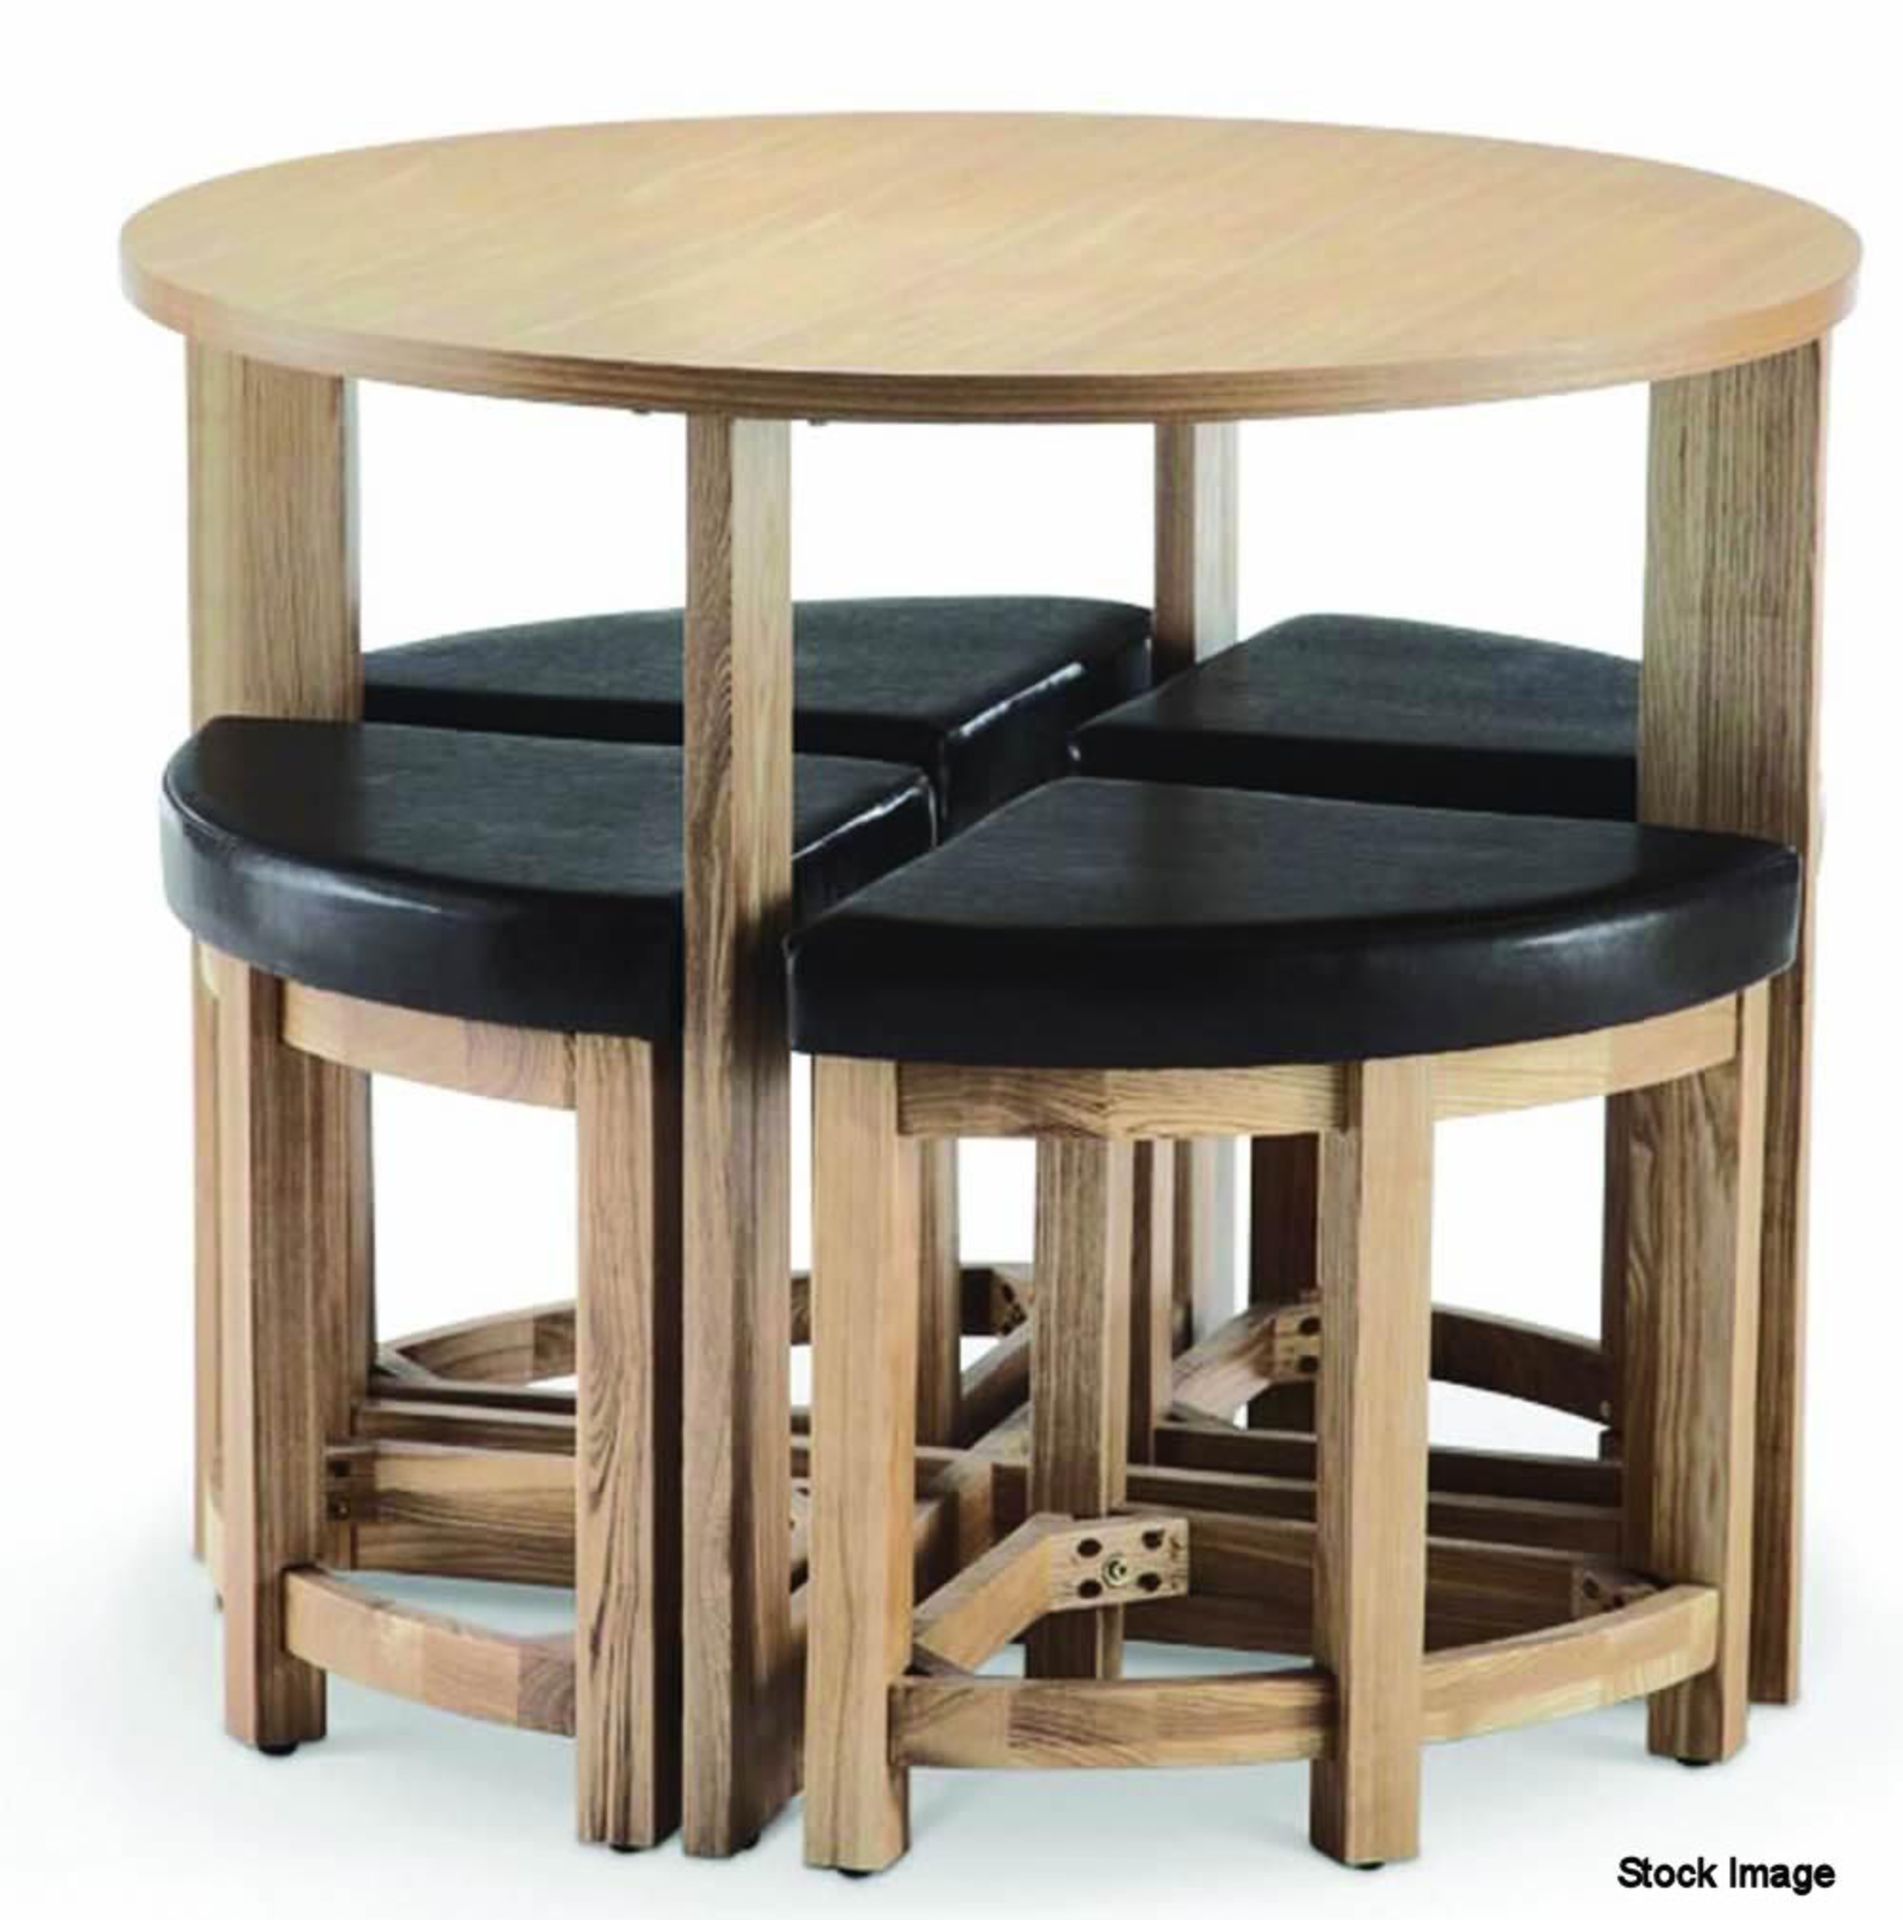 Oak Ash Veneer Stowaway Dining Table with 4 Brown Faux Leather Padded Stools - CL185 - Ref:OakSW - L - Image 3 of 9